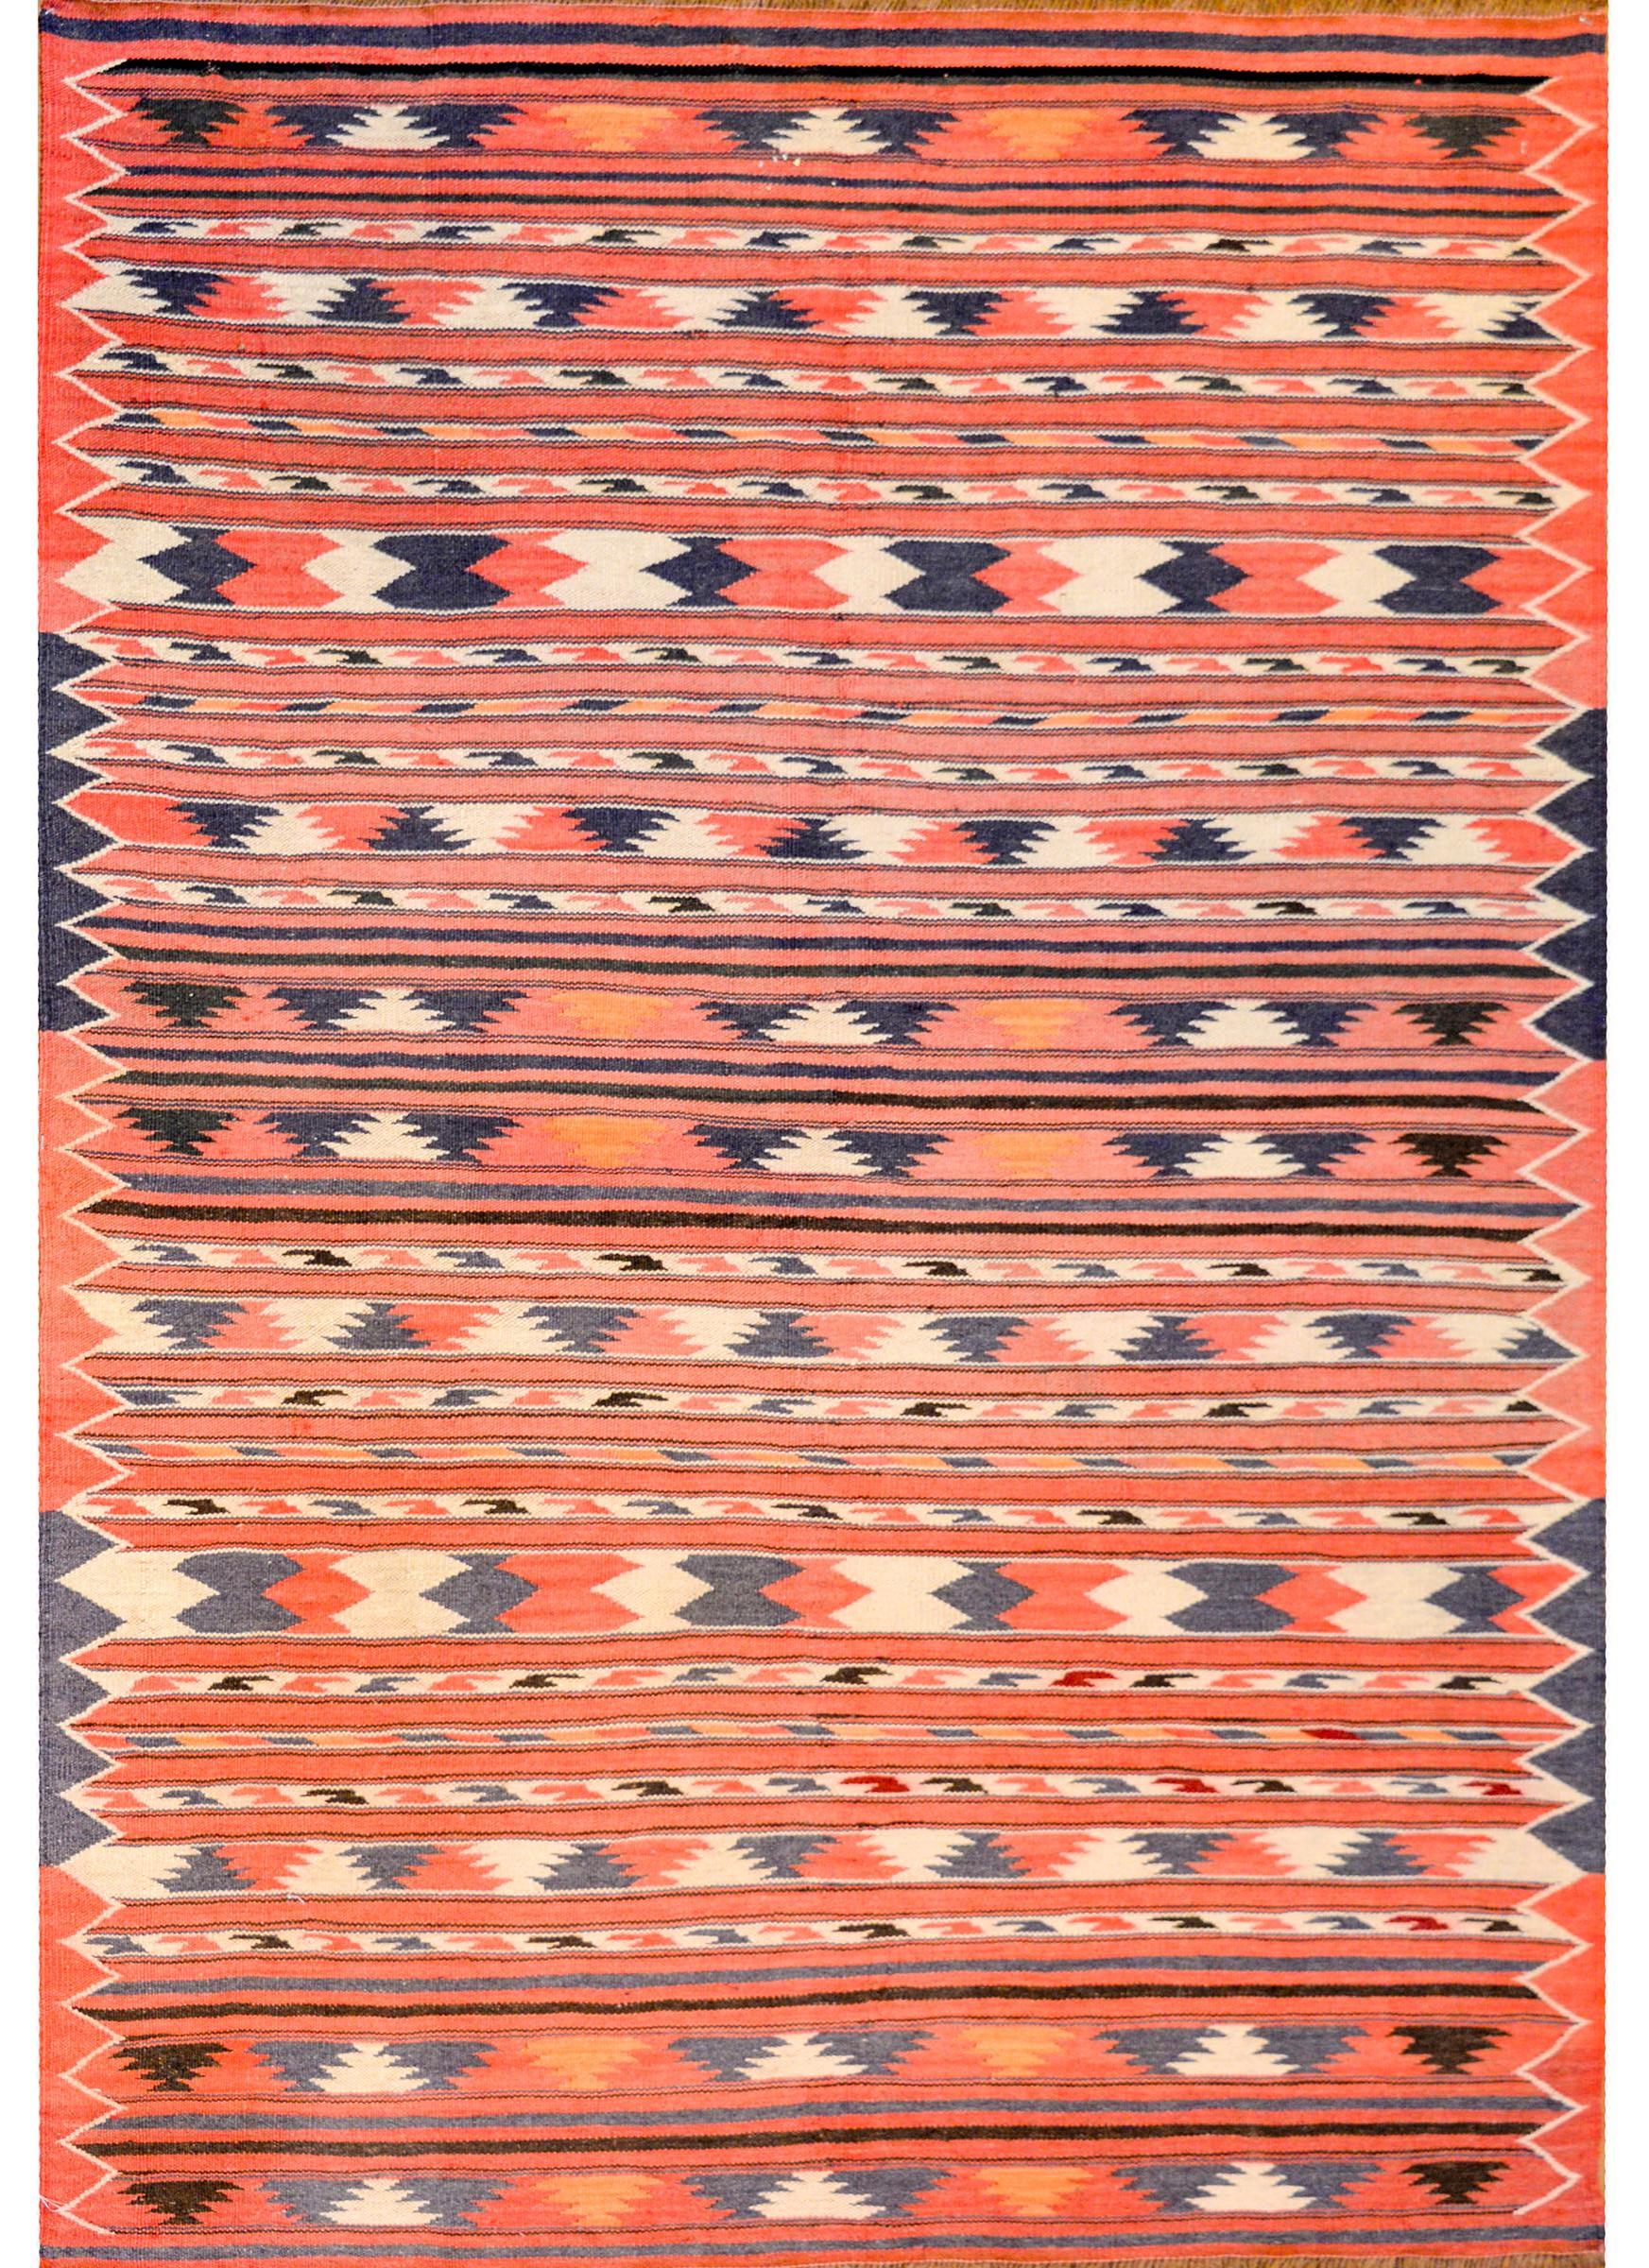 A fantastic mid-20th century Persian Turkmen rug with an all-over striped pattern woven in crimson, indigo, black, orange, and white, vegetable dyed wool, surrounded by a matching border of similar design.